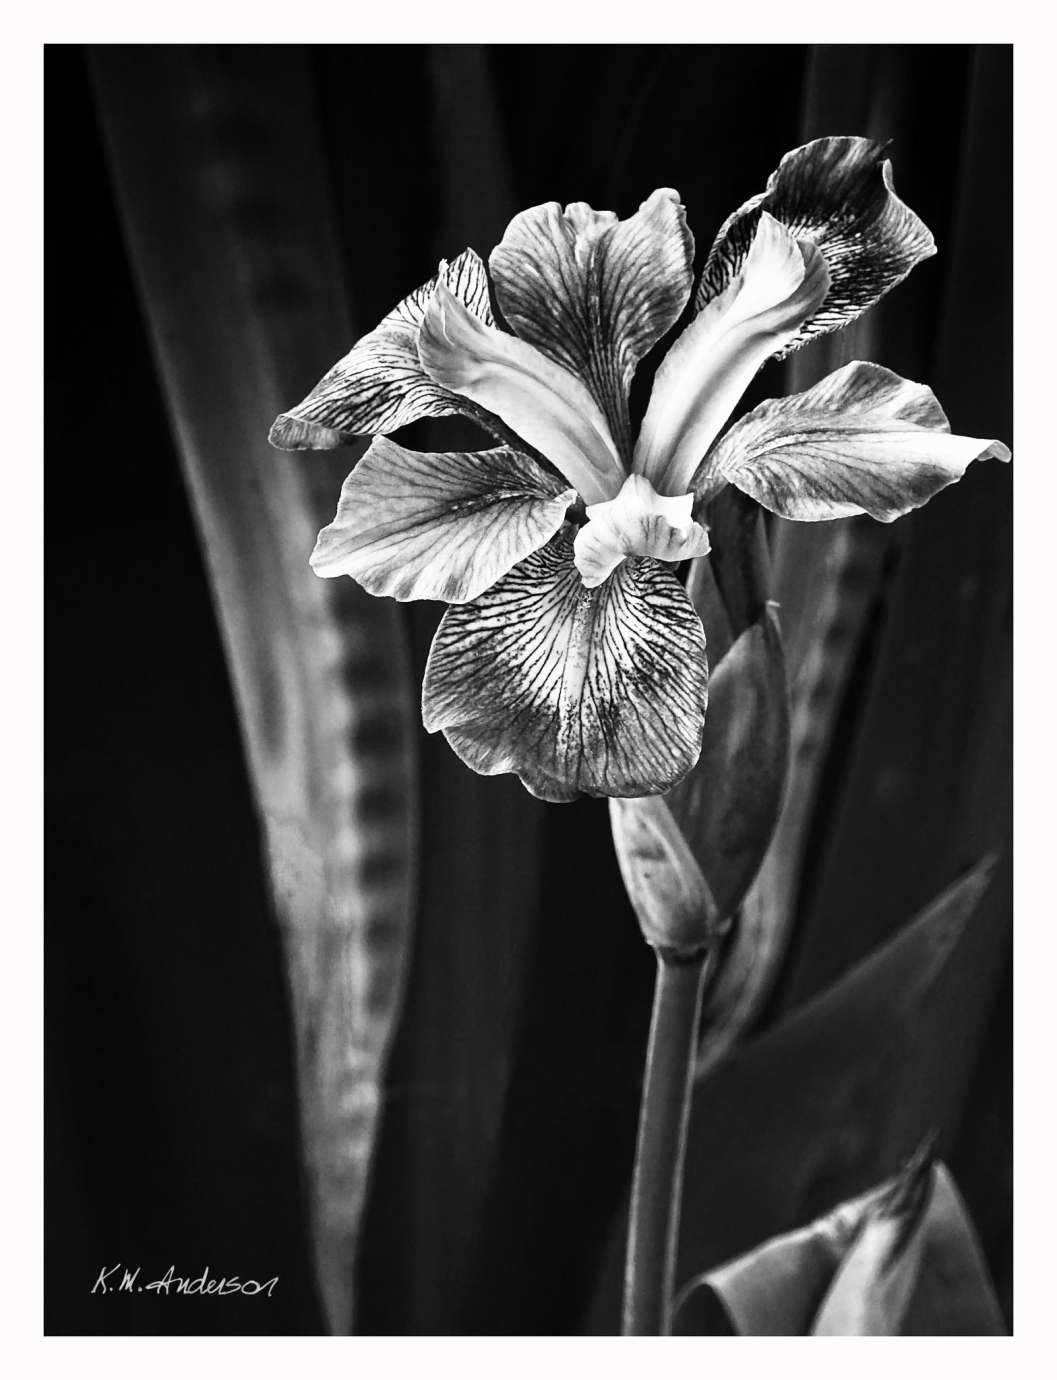 Black and white photo of a single iris on a long stem